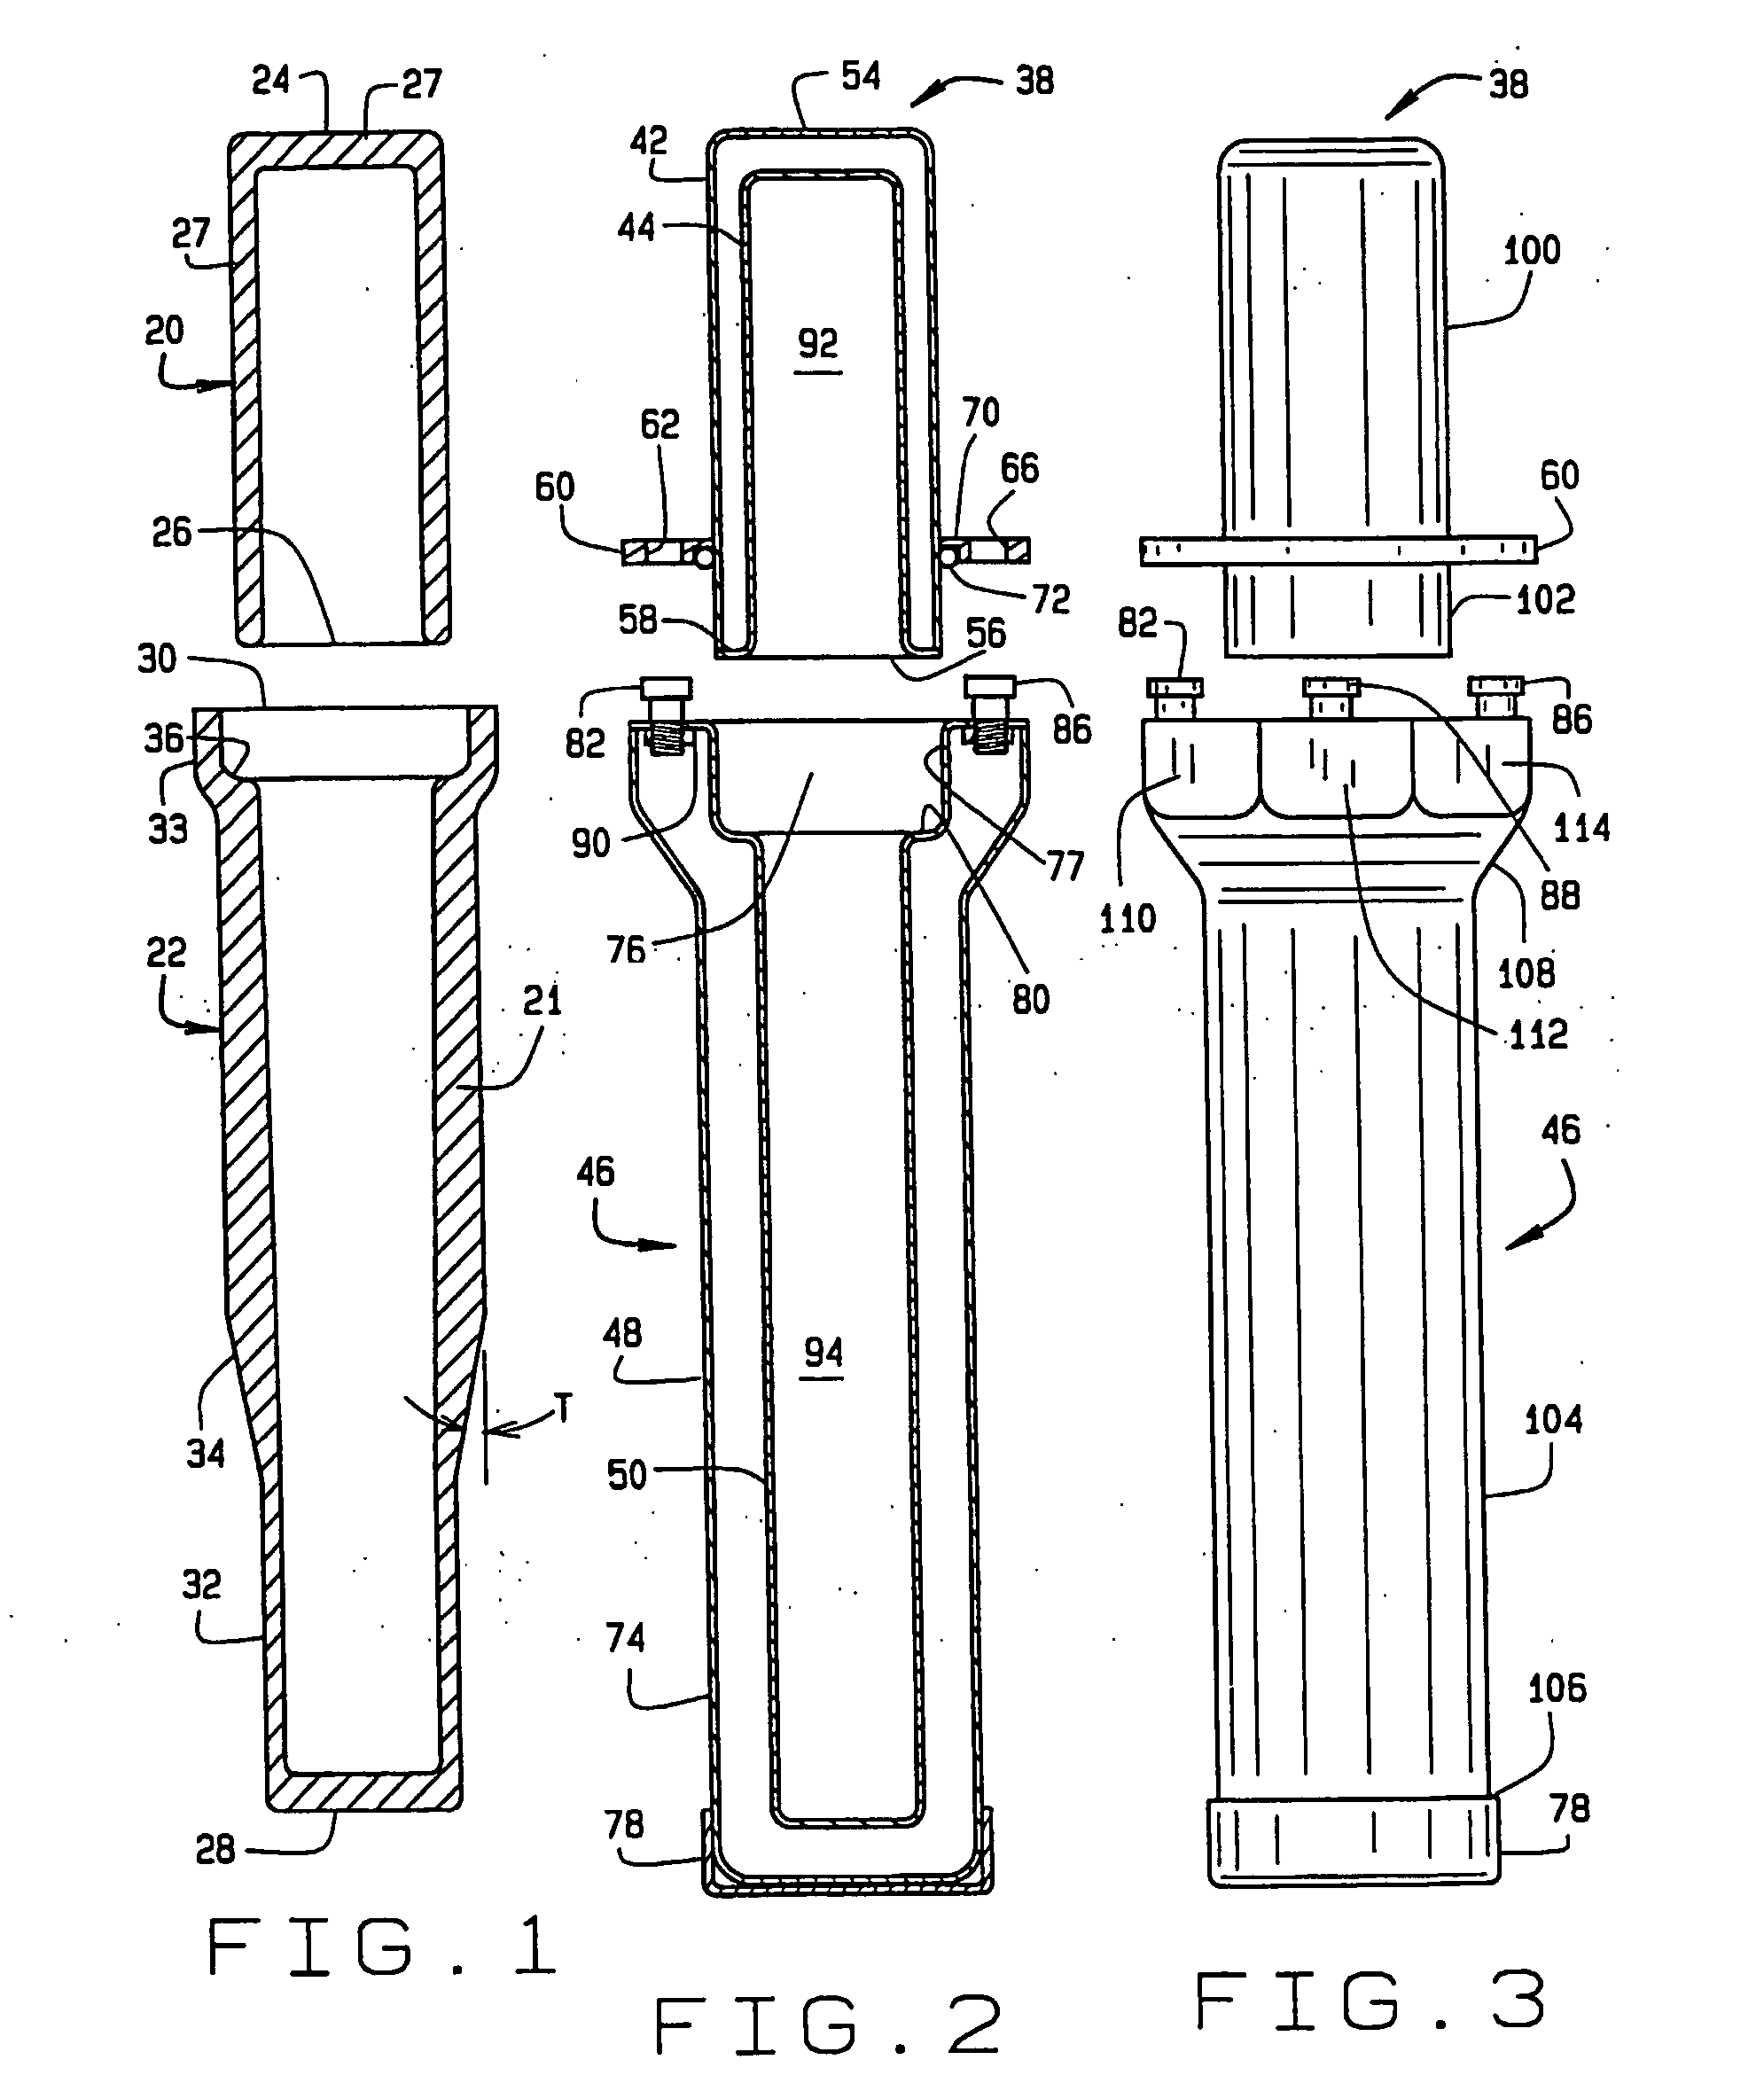 Pharmaceutical pig and method of use